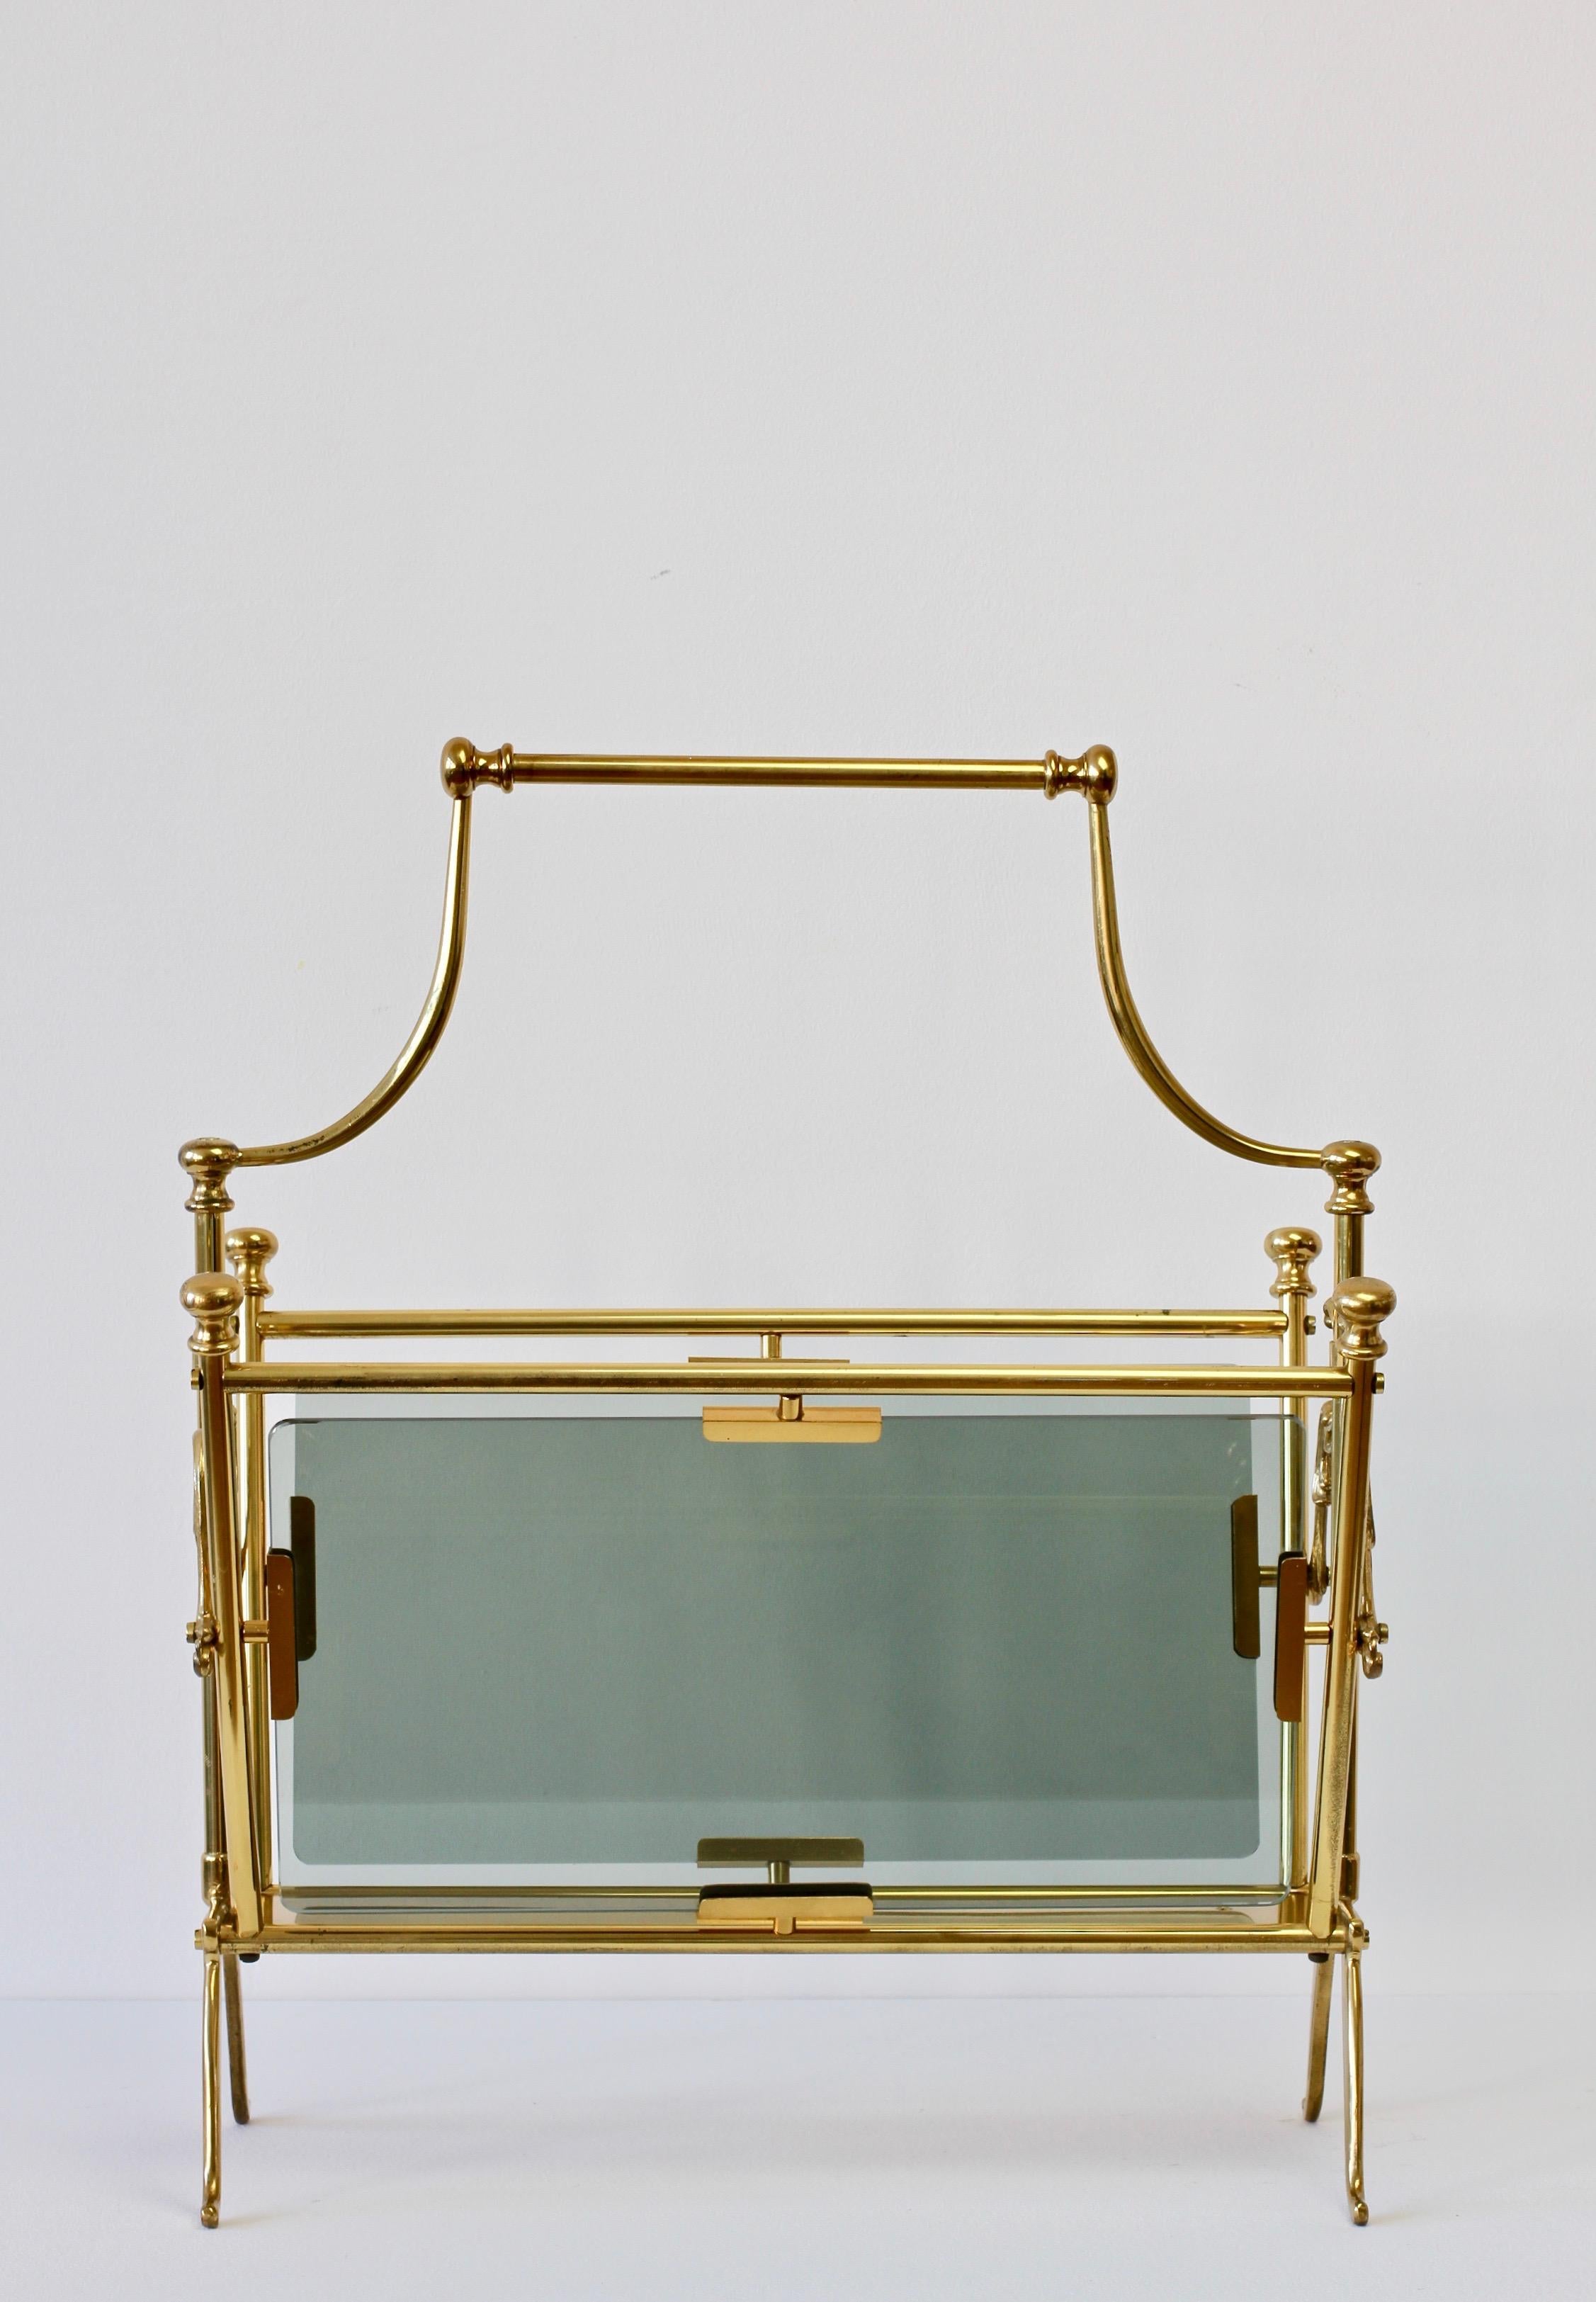 Brass and dark smoked toned glass magazine / newspaper / book rack, holder or stand, often attributed to Maison Jansen and Maison Baguès but, we have seen enough examples with labels showing that they were made in Italy and not, as some suggest,